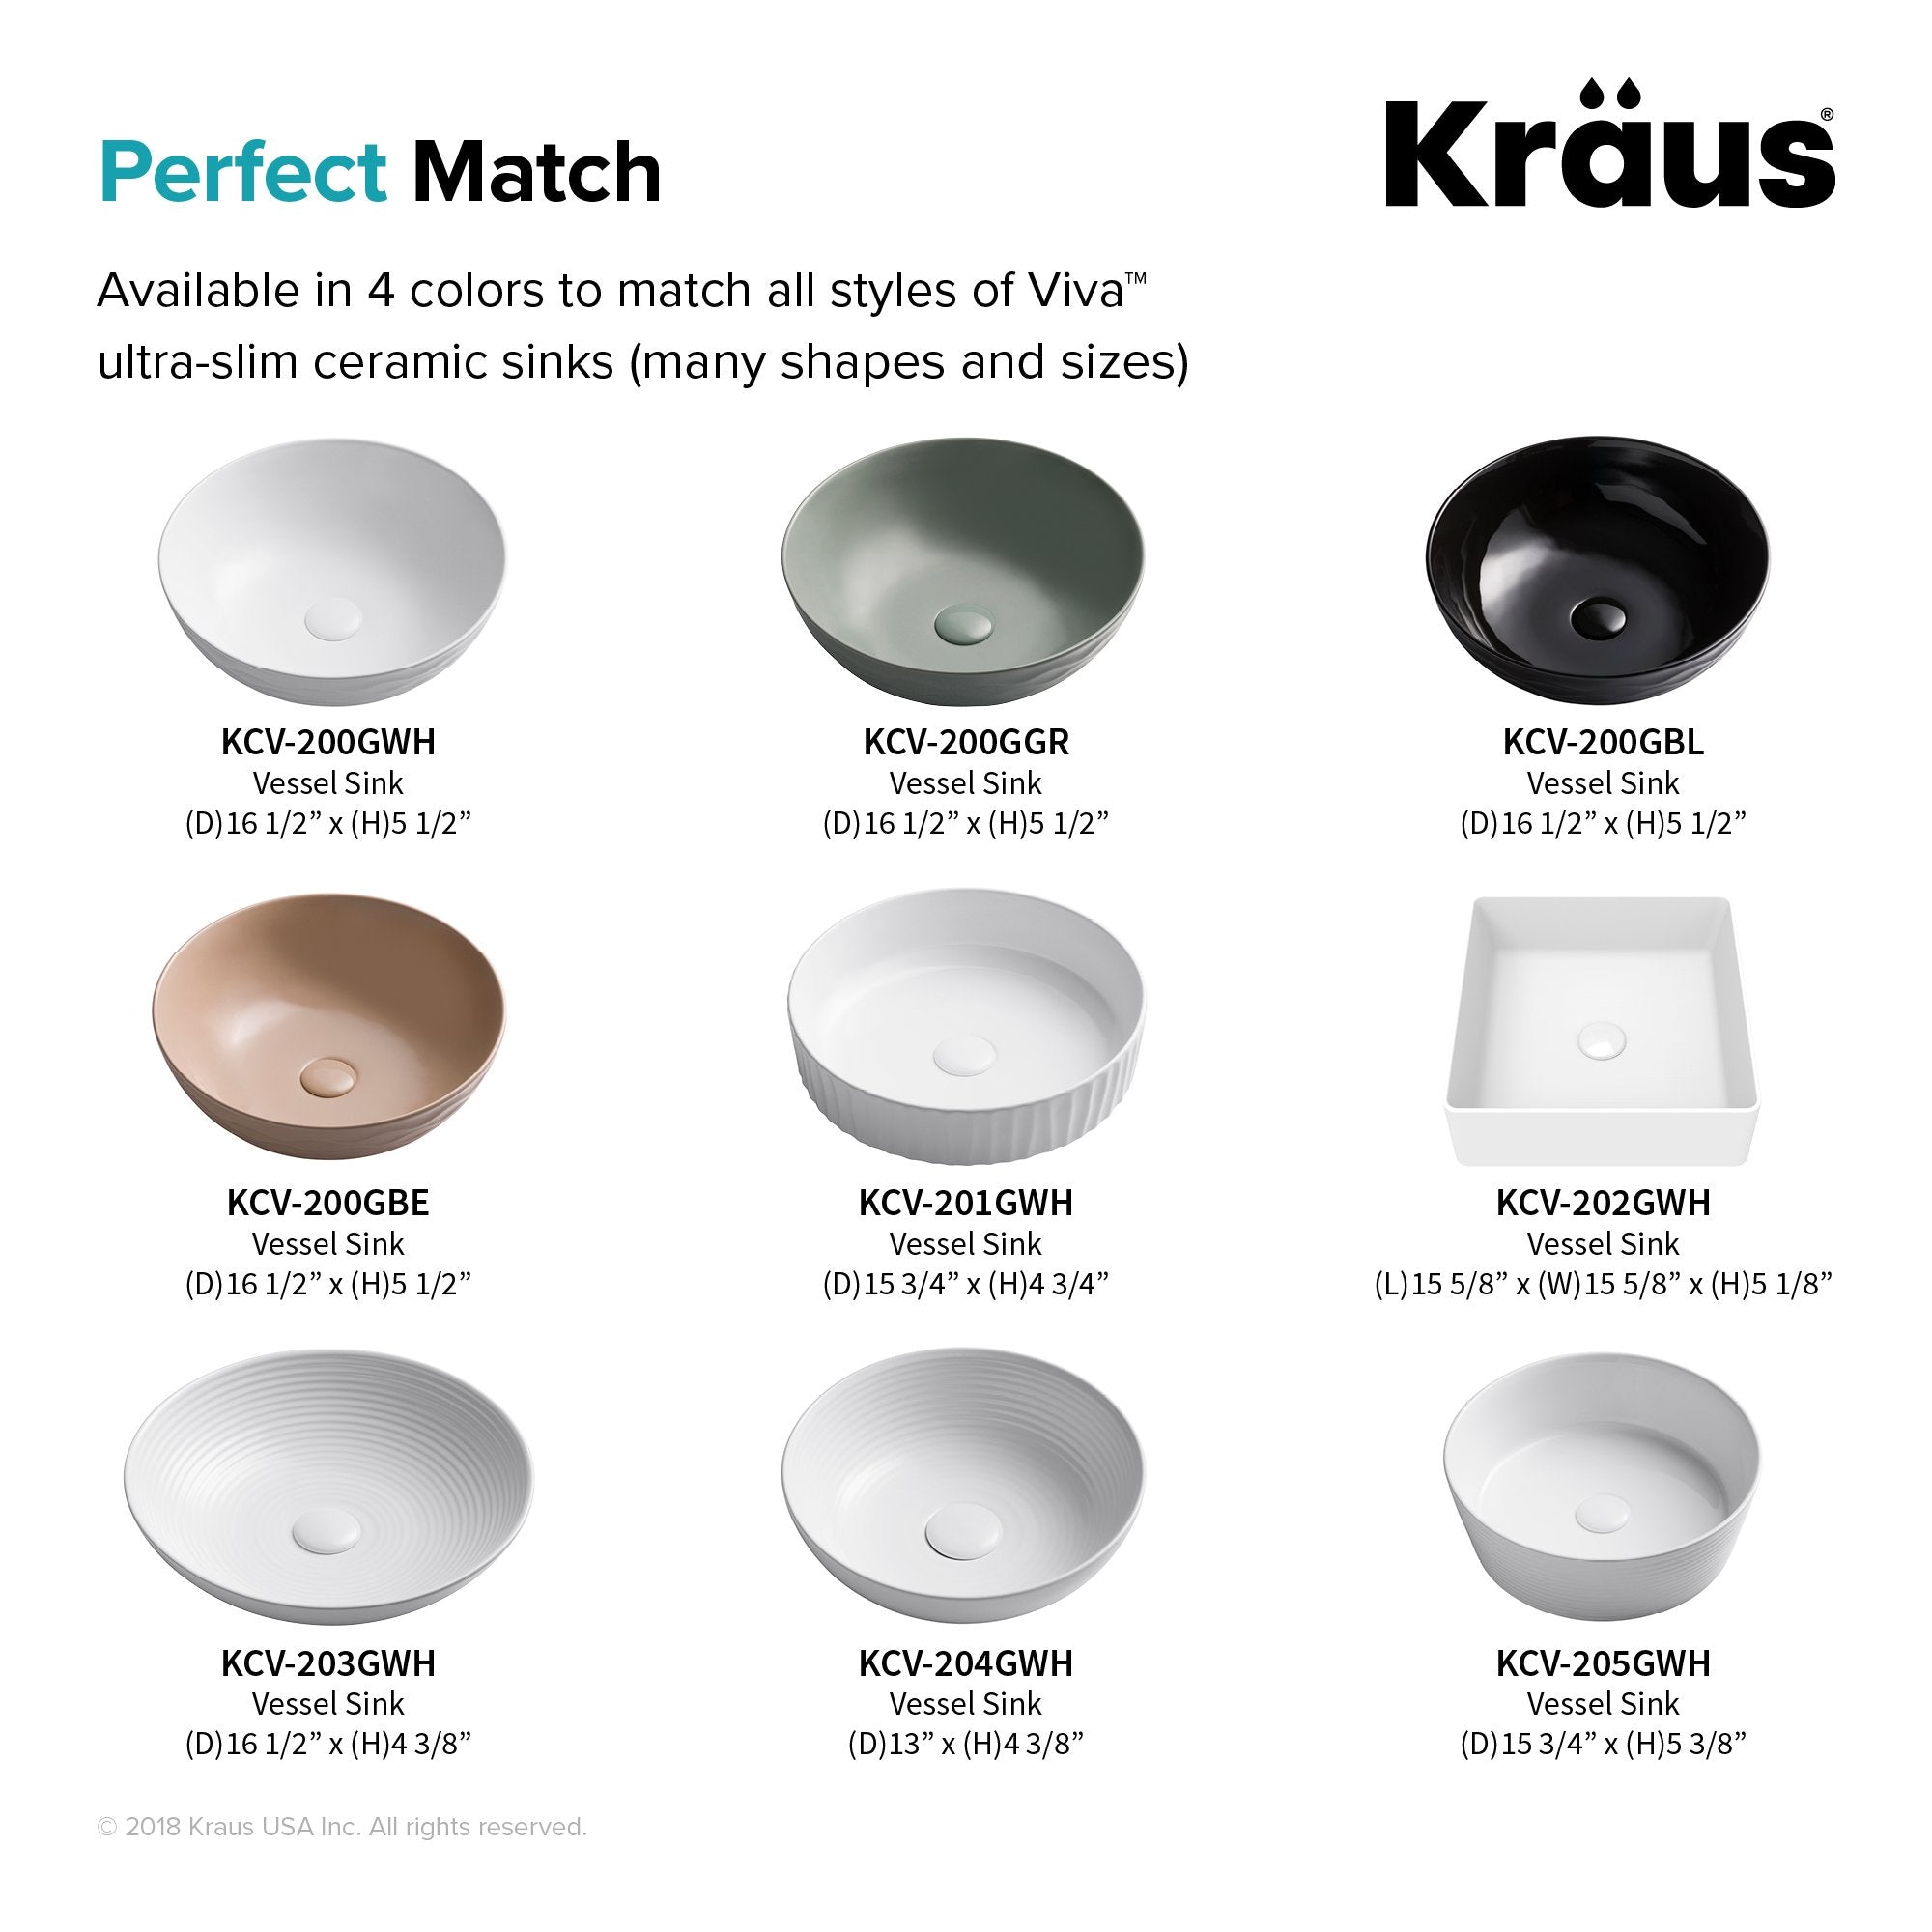 KRAUS Pop-Up Drain with Porcelain Ceramic Top for Bathroom Sink without Overflow, Gloss Grey-Bathroom Accessories-KRAUS Fast Shipping